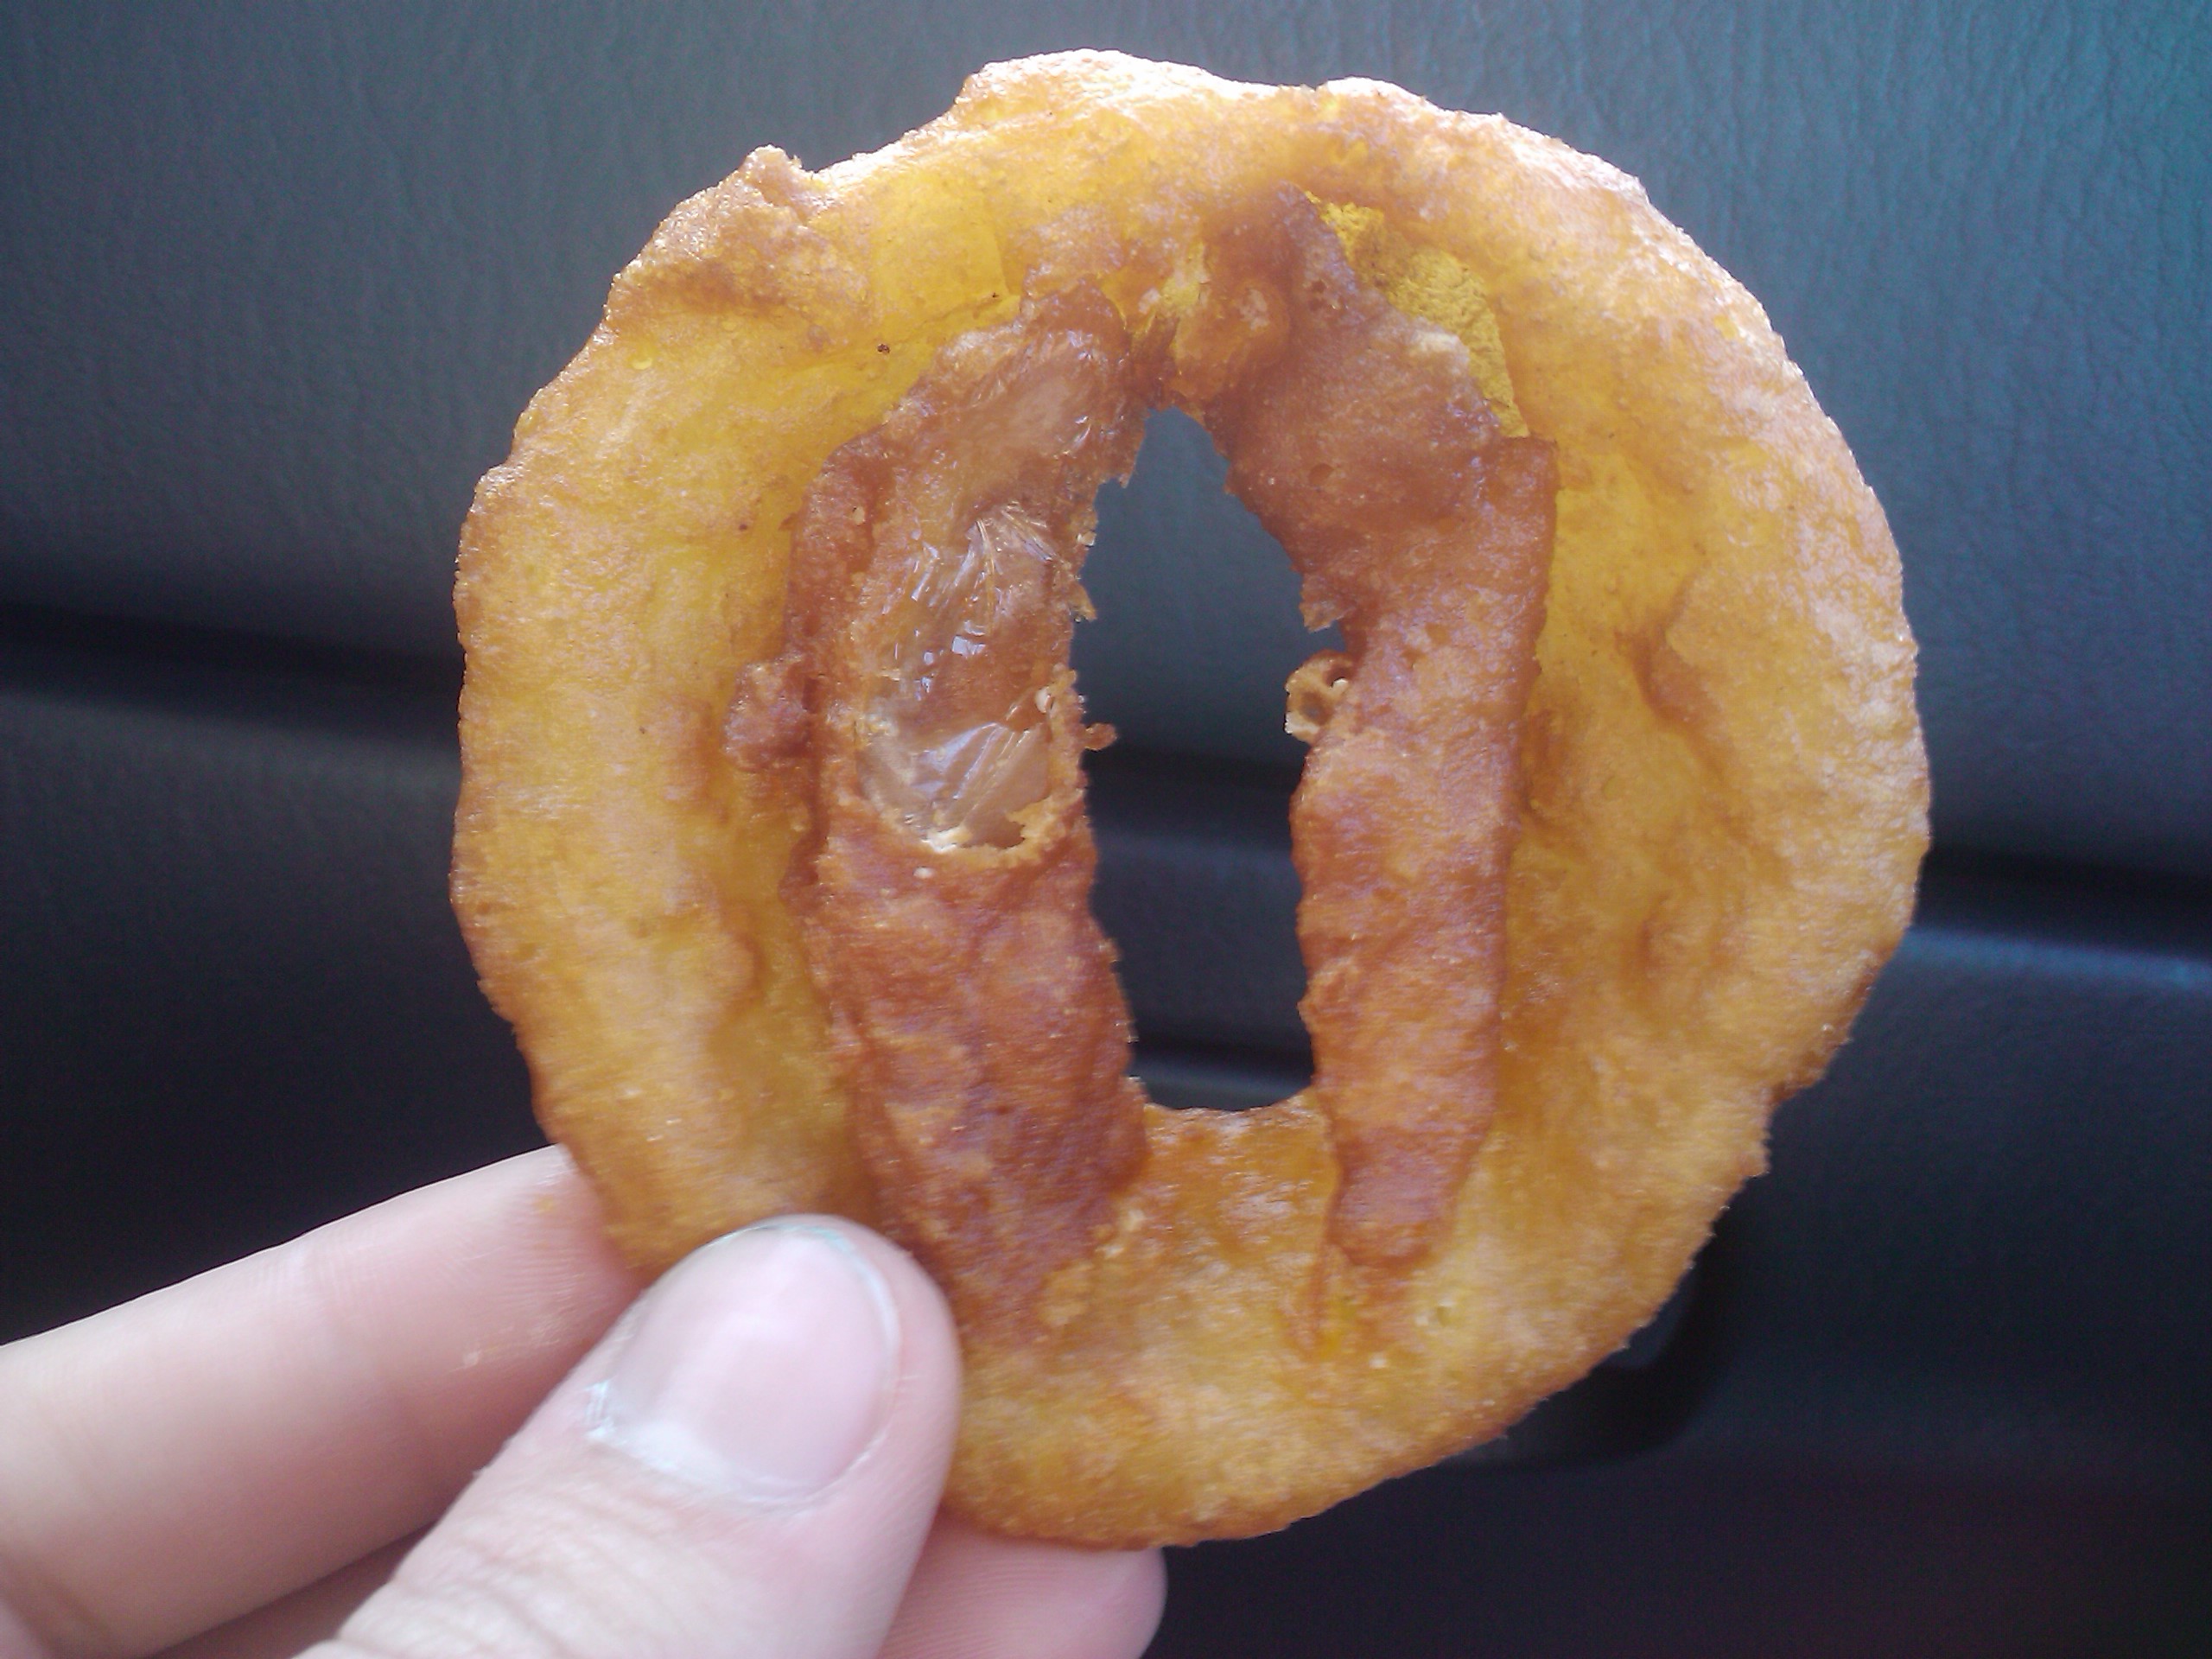 Does this look familiar? Found this in my bag of onion rings from Wal-mart